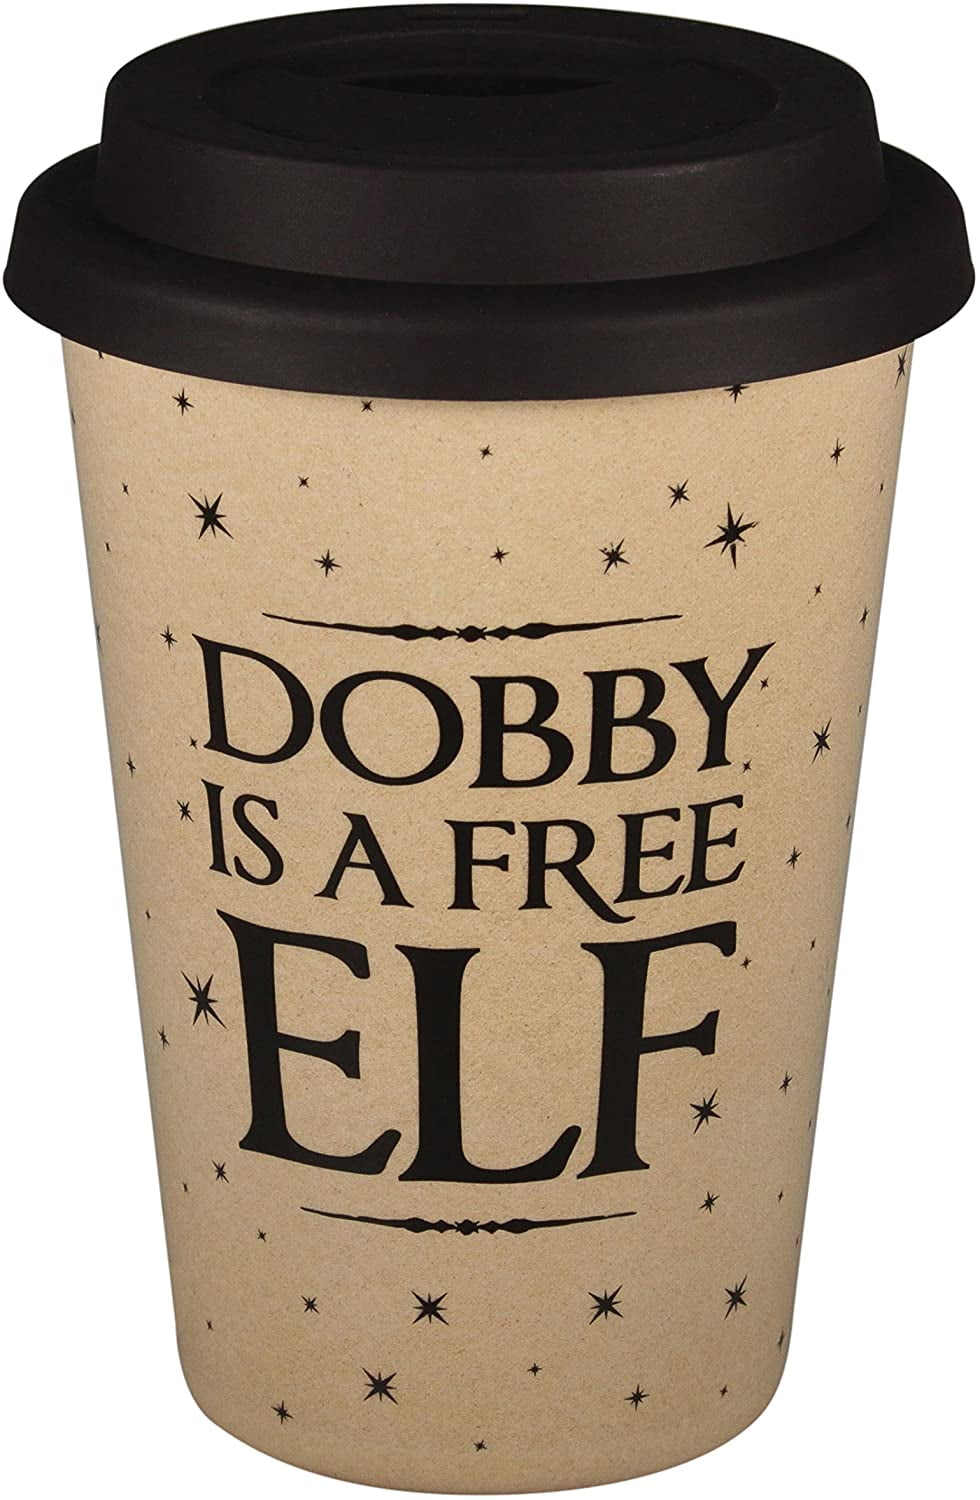 OFFICIAL HARRY POTTER HUSKUP ECO FRIENDLY DOBBY FREE ELF TRAVEL COFFEE MUG CUP 